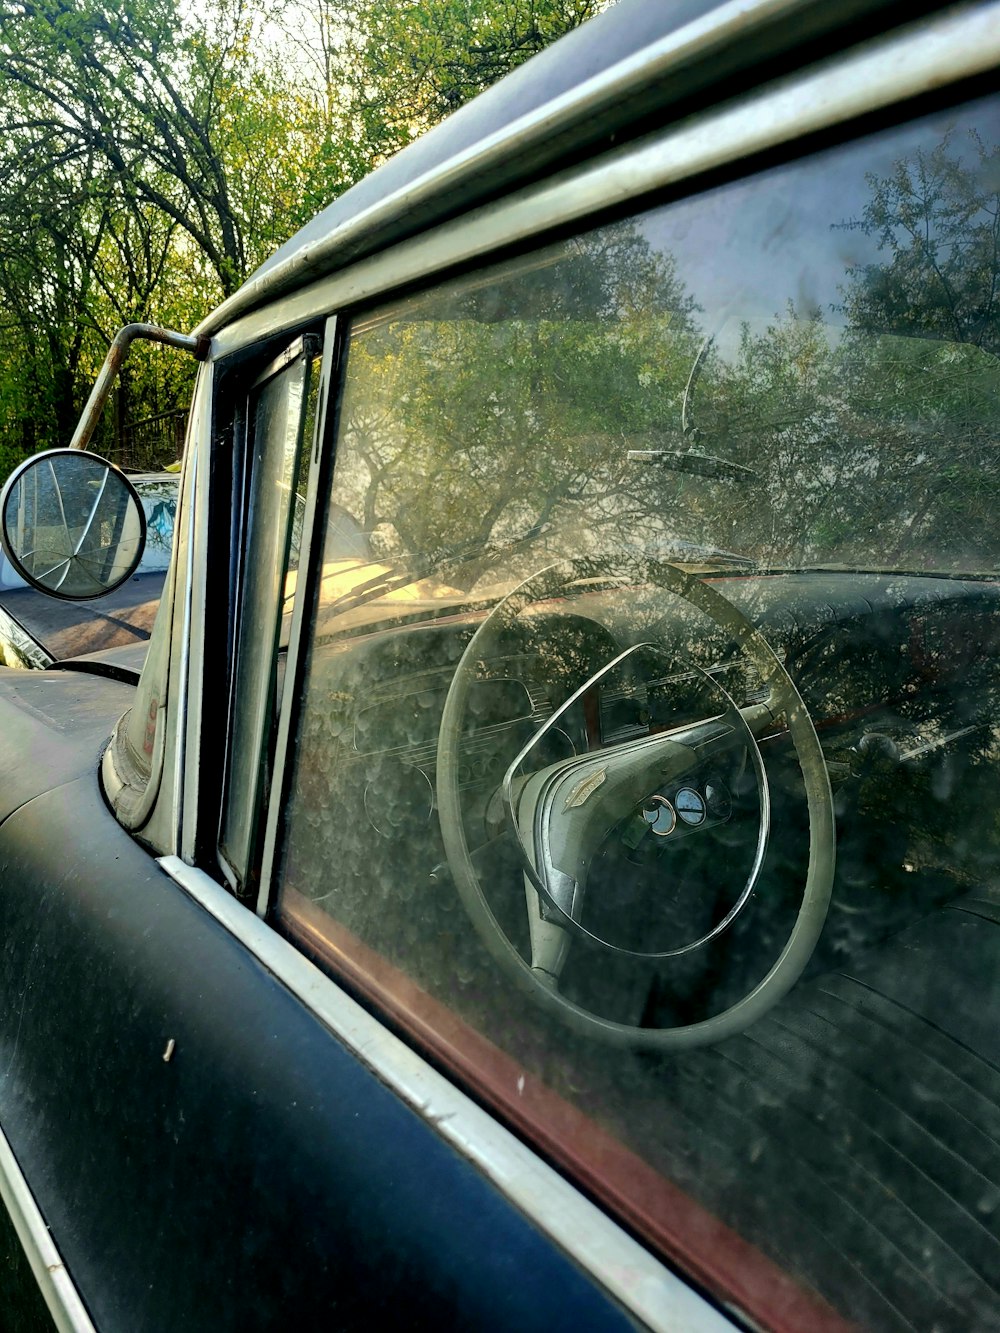 a view of a car from inside the car